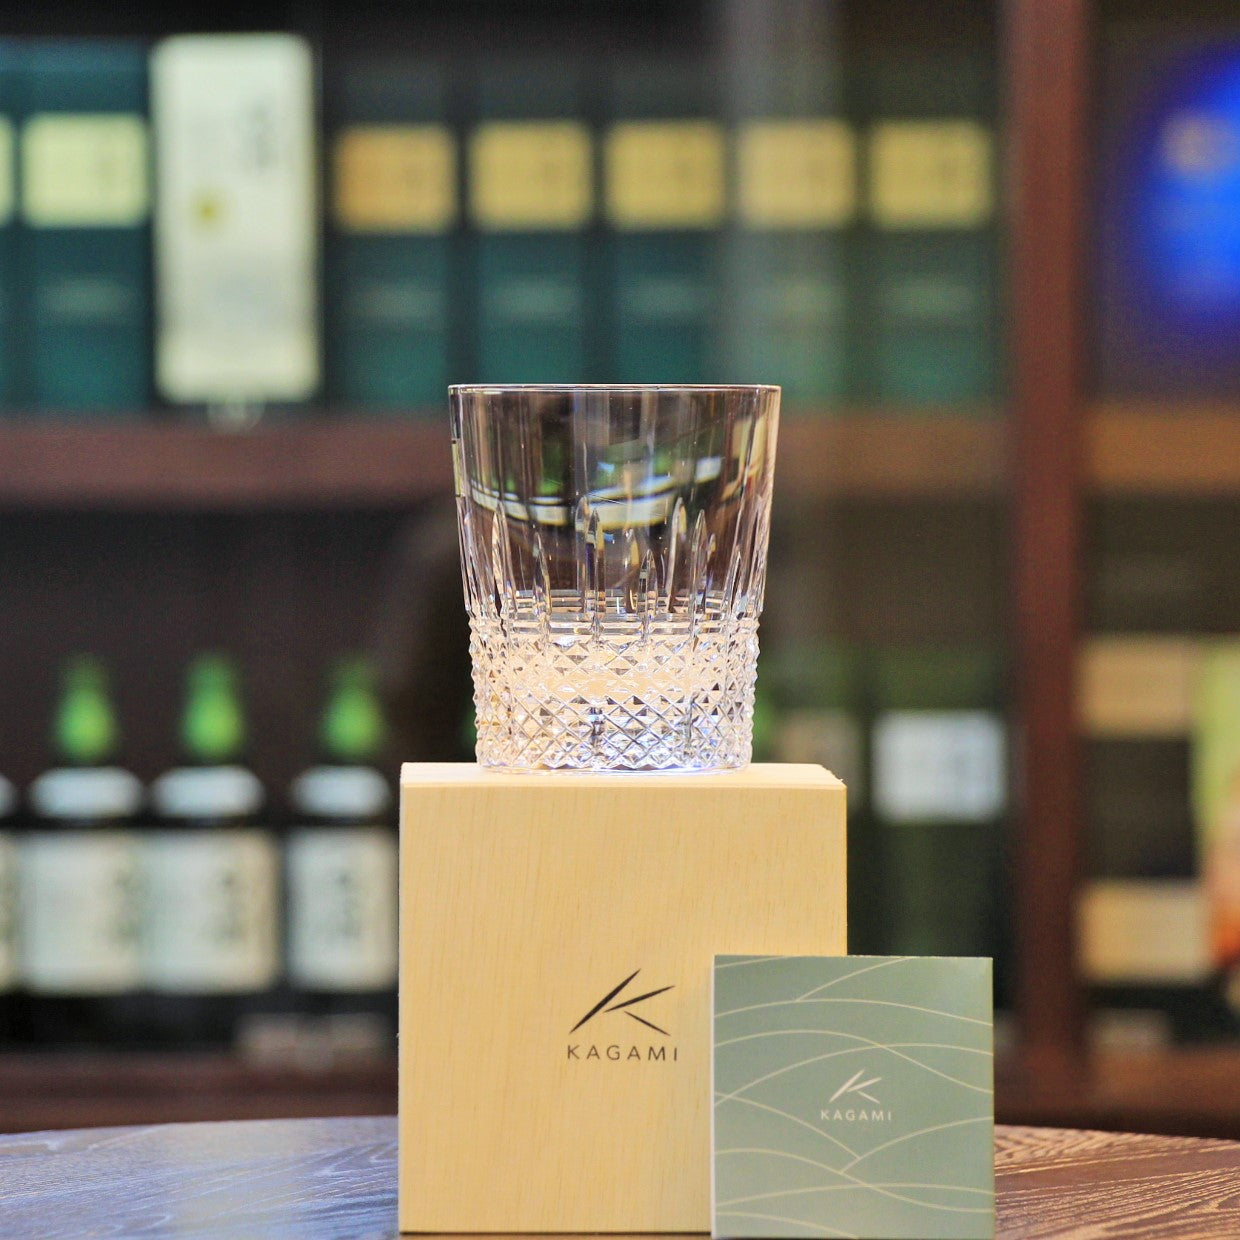 This Kagami Crystal Whisky Glass beautiful hand cut glass comes in a wooden gift box. Perfect for enjoying a glass of whisky either straight up or on the rocks! Also perfect for other iced drinks. A great gift for the whisky lover.